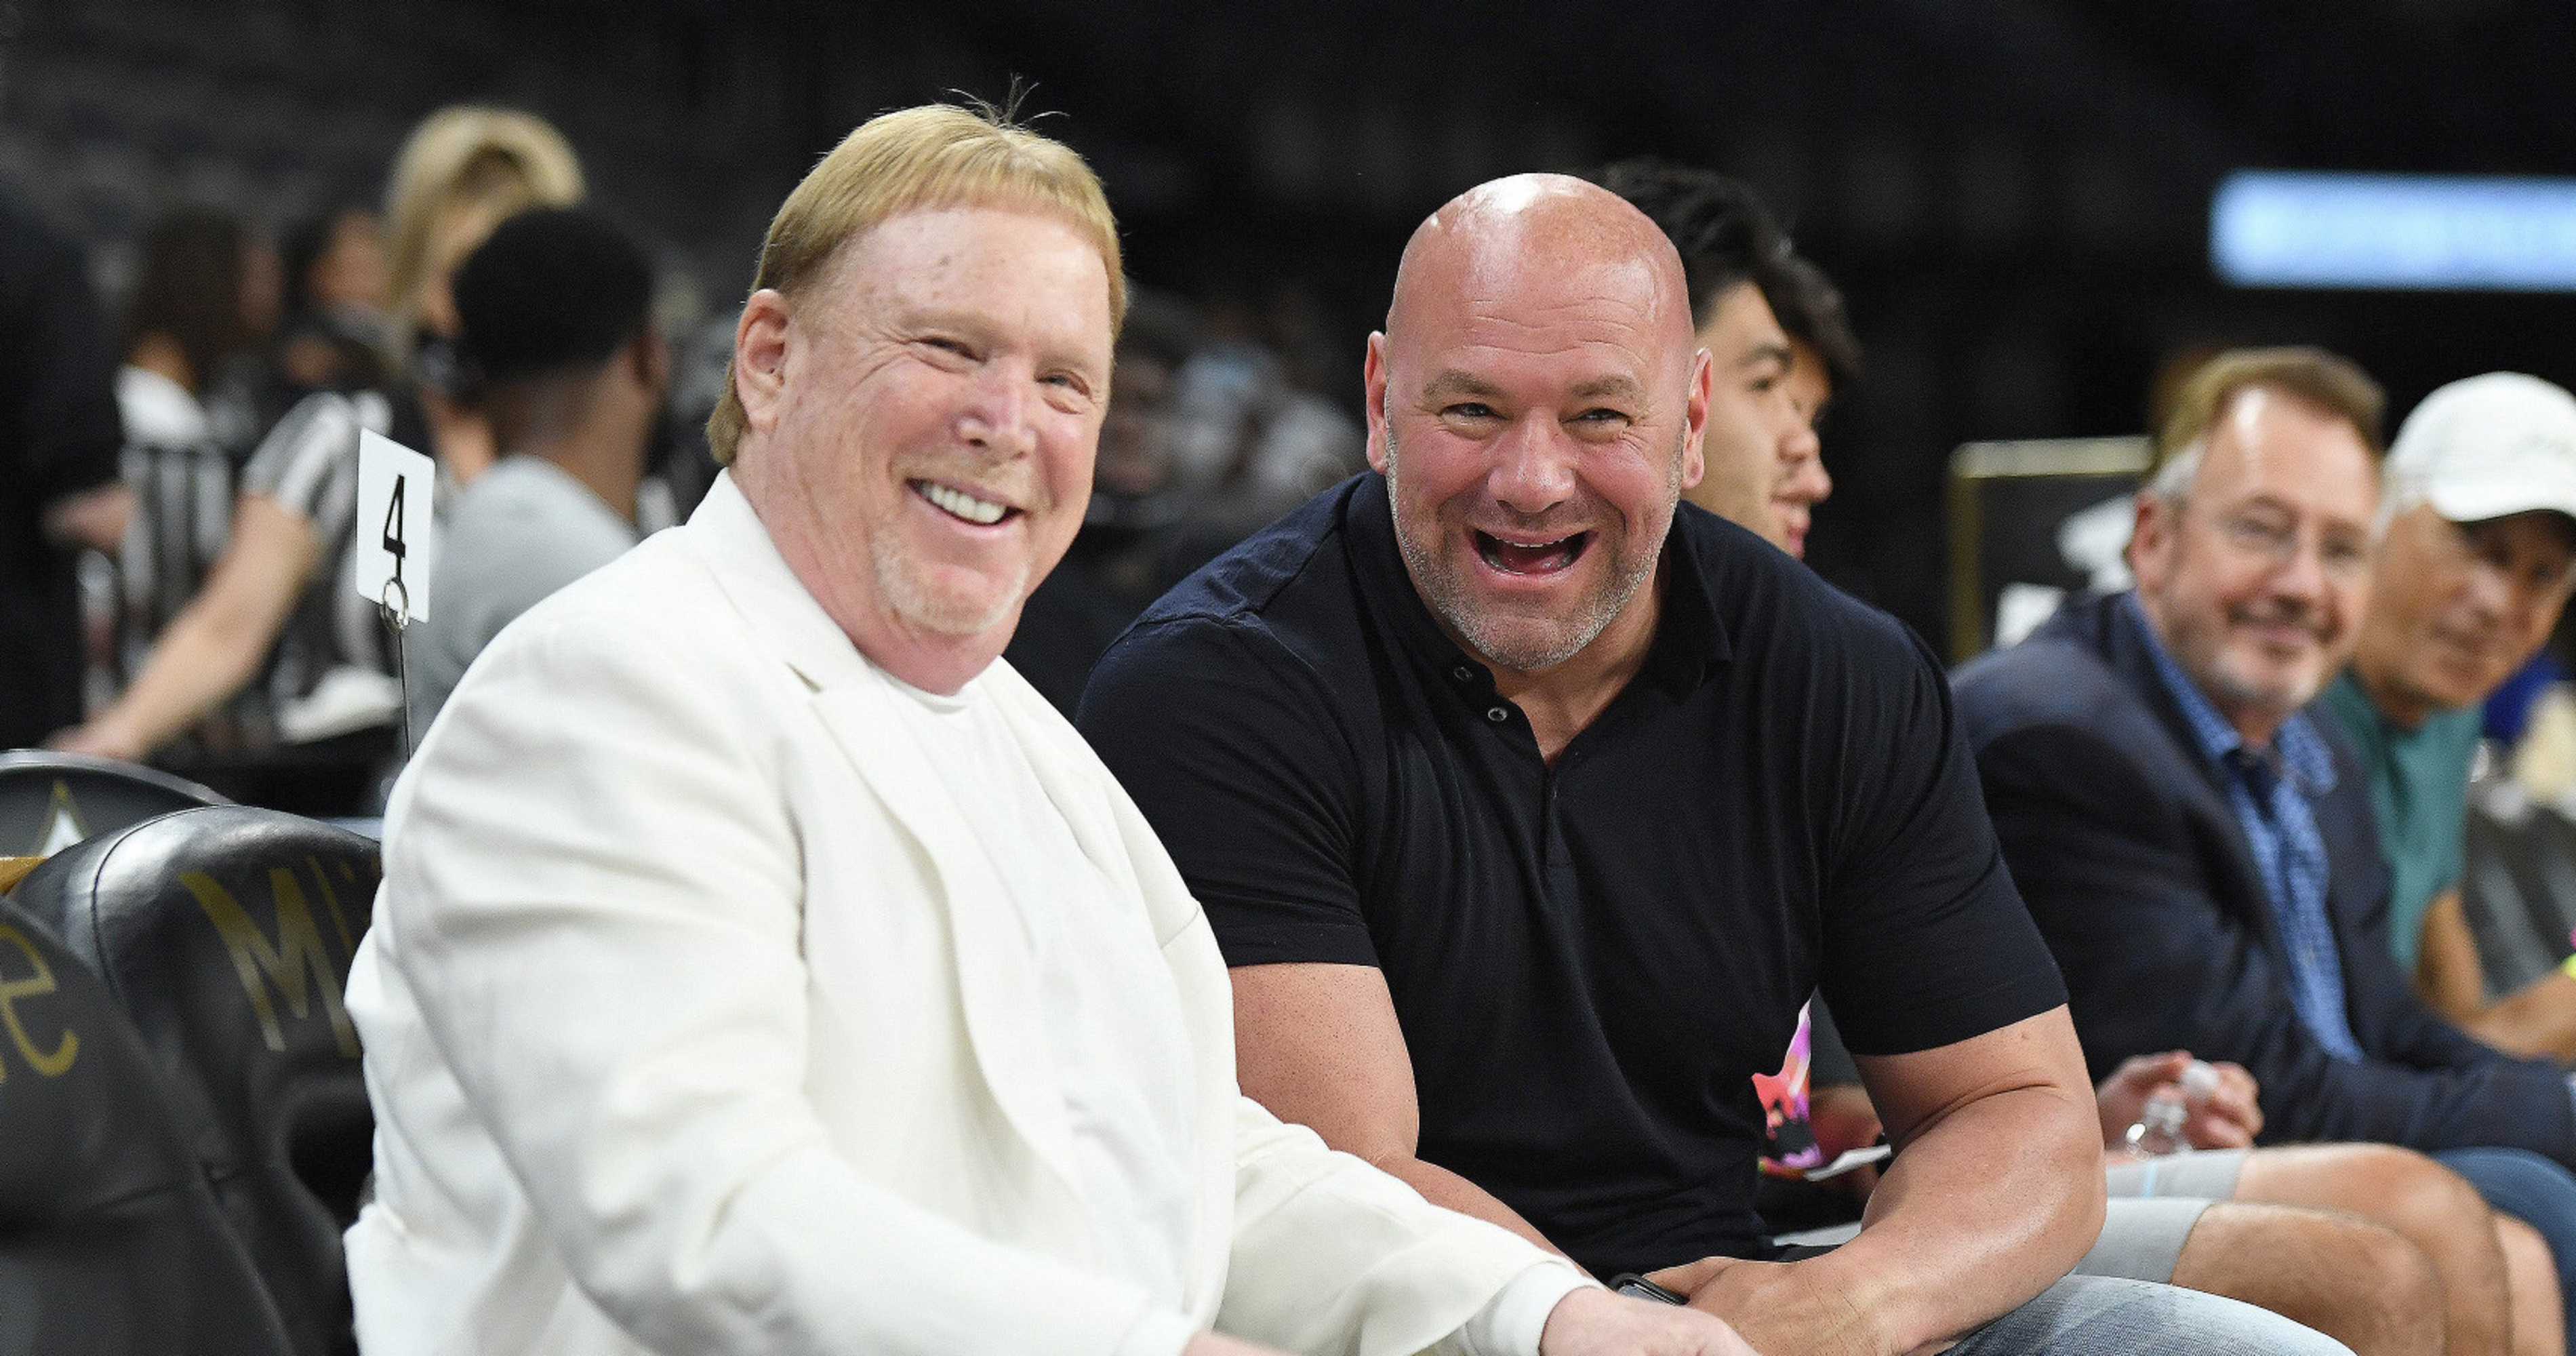 UFC president Dana White says he helped broker deal for Tom Brady, Rob  Gronkowski to join Raiders in 2020, but Jon Gruden 'blew it up'